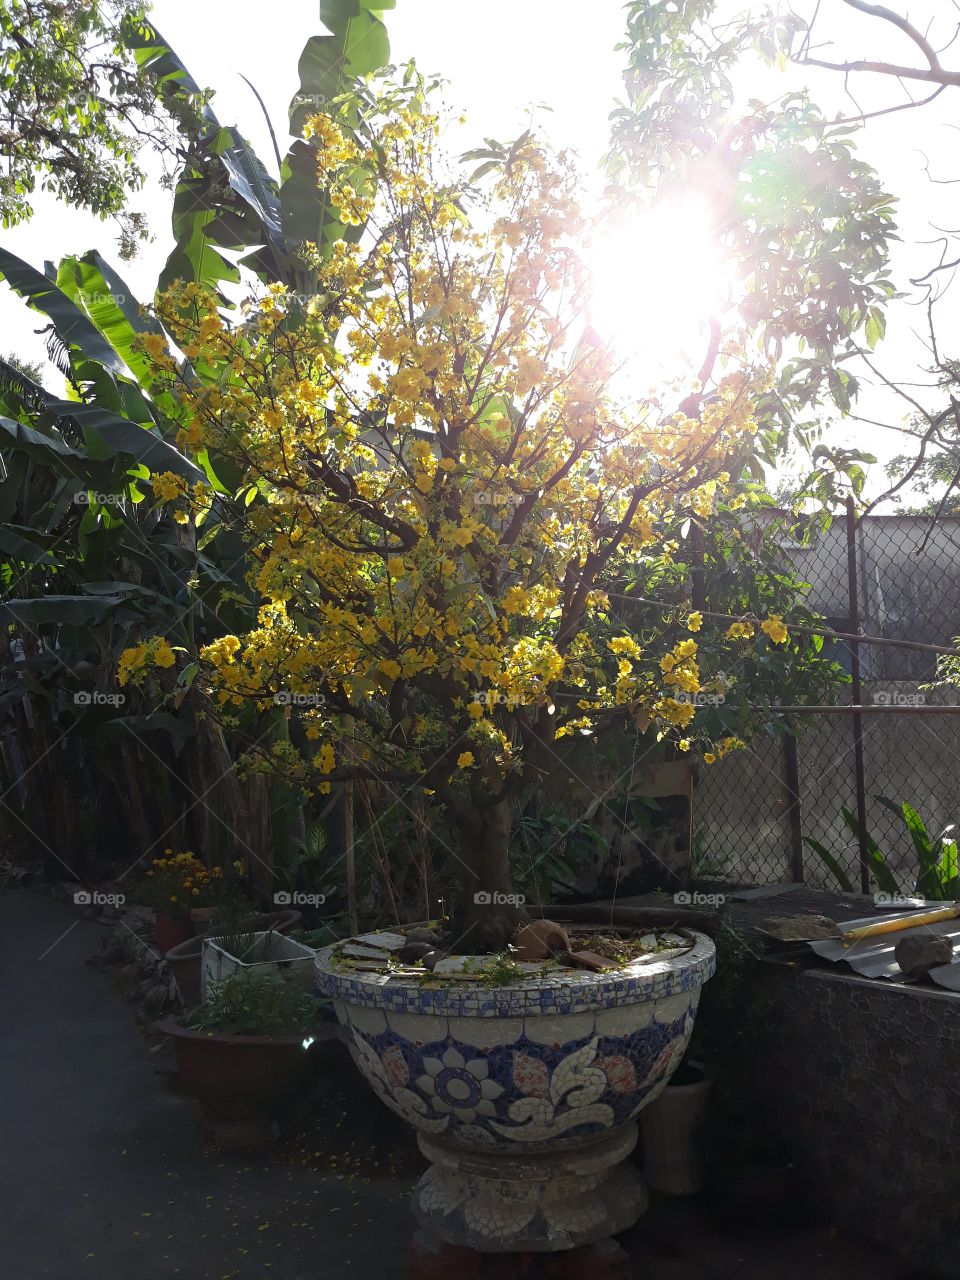 apricot in Tet Holiday